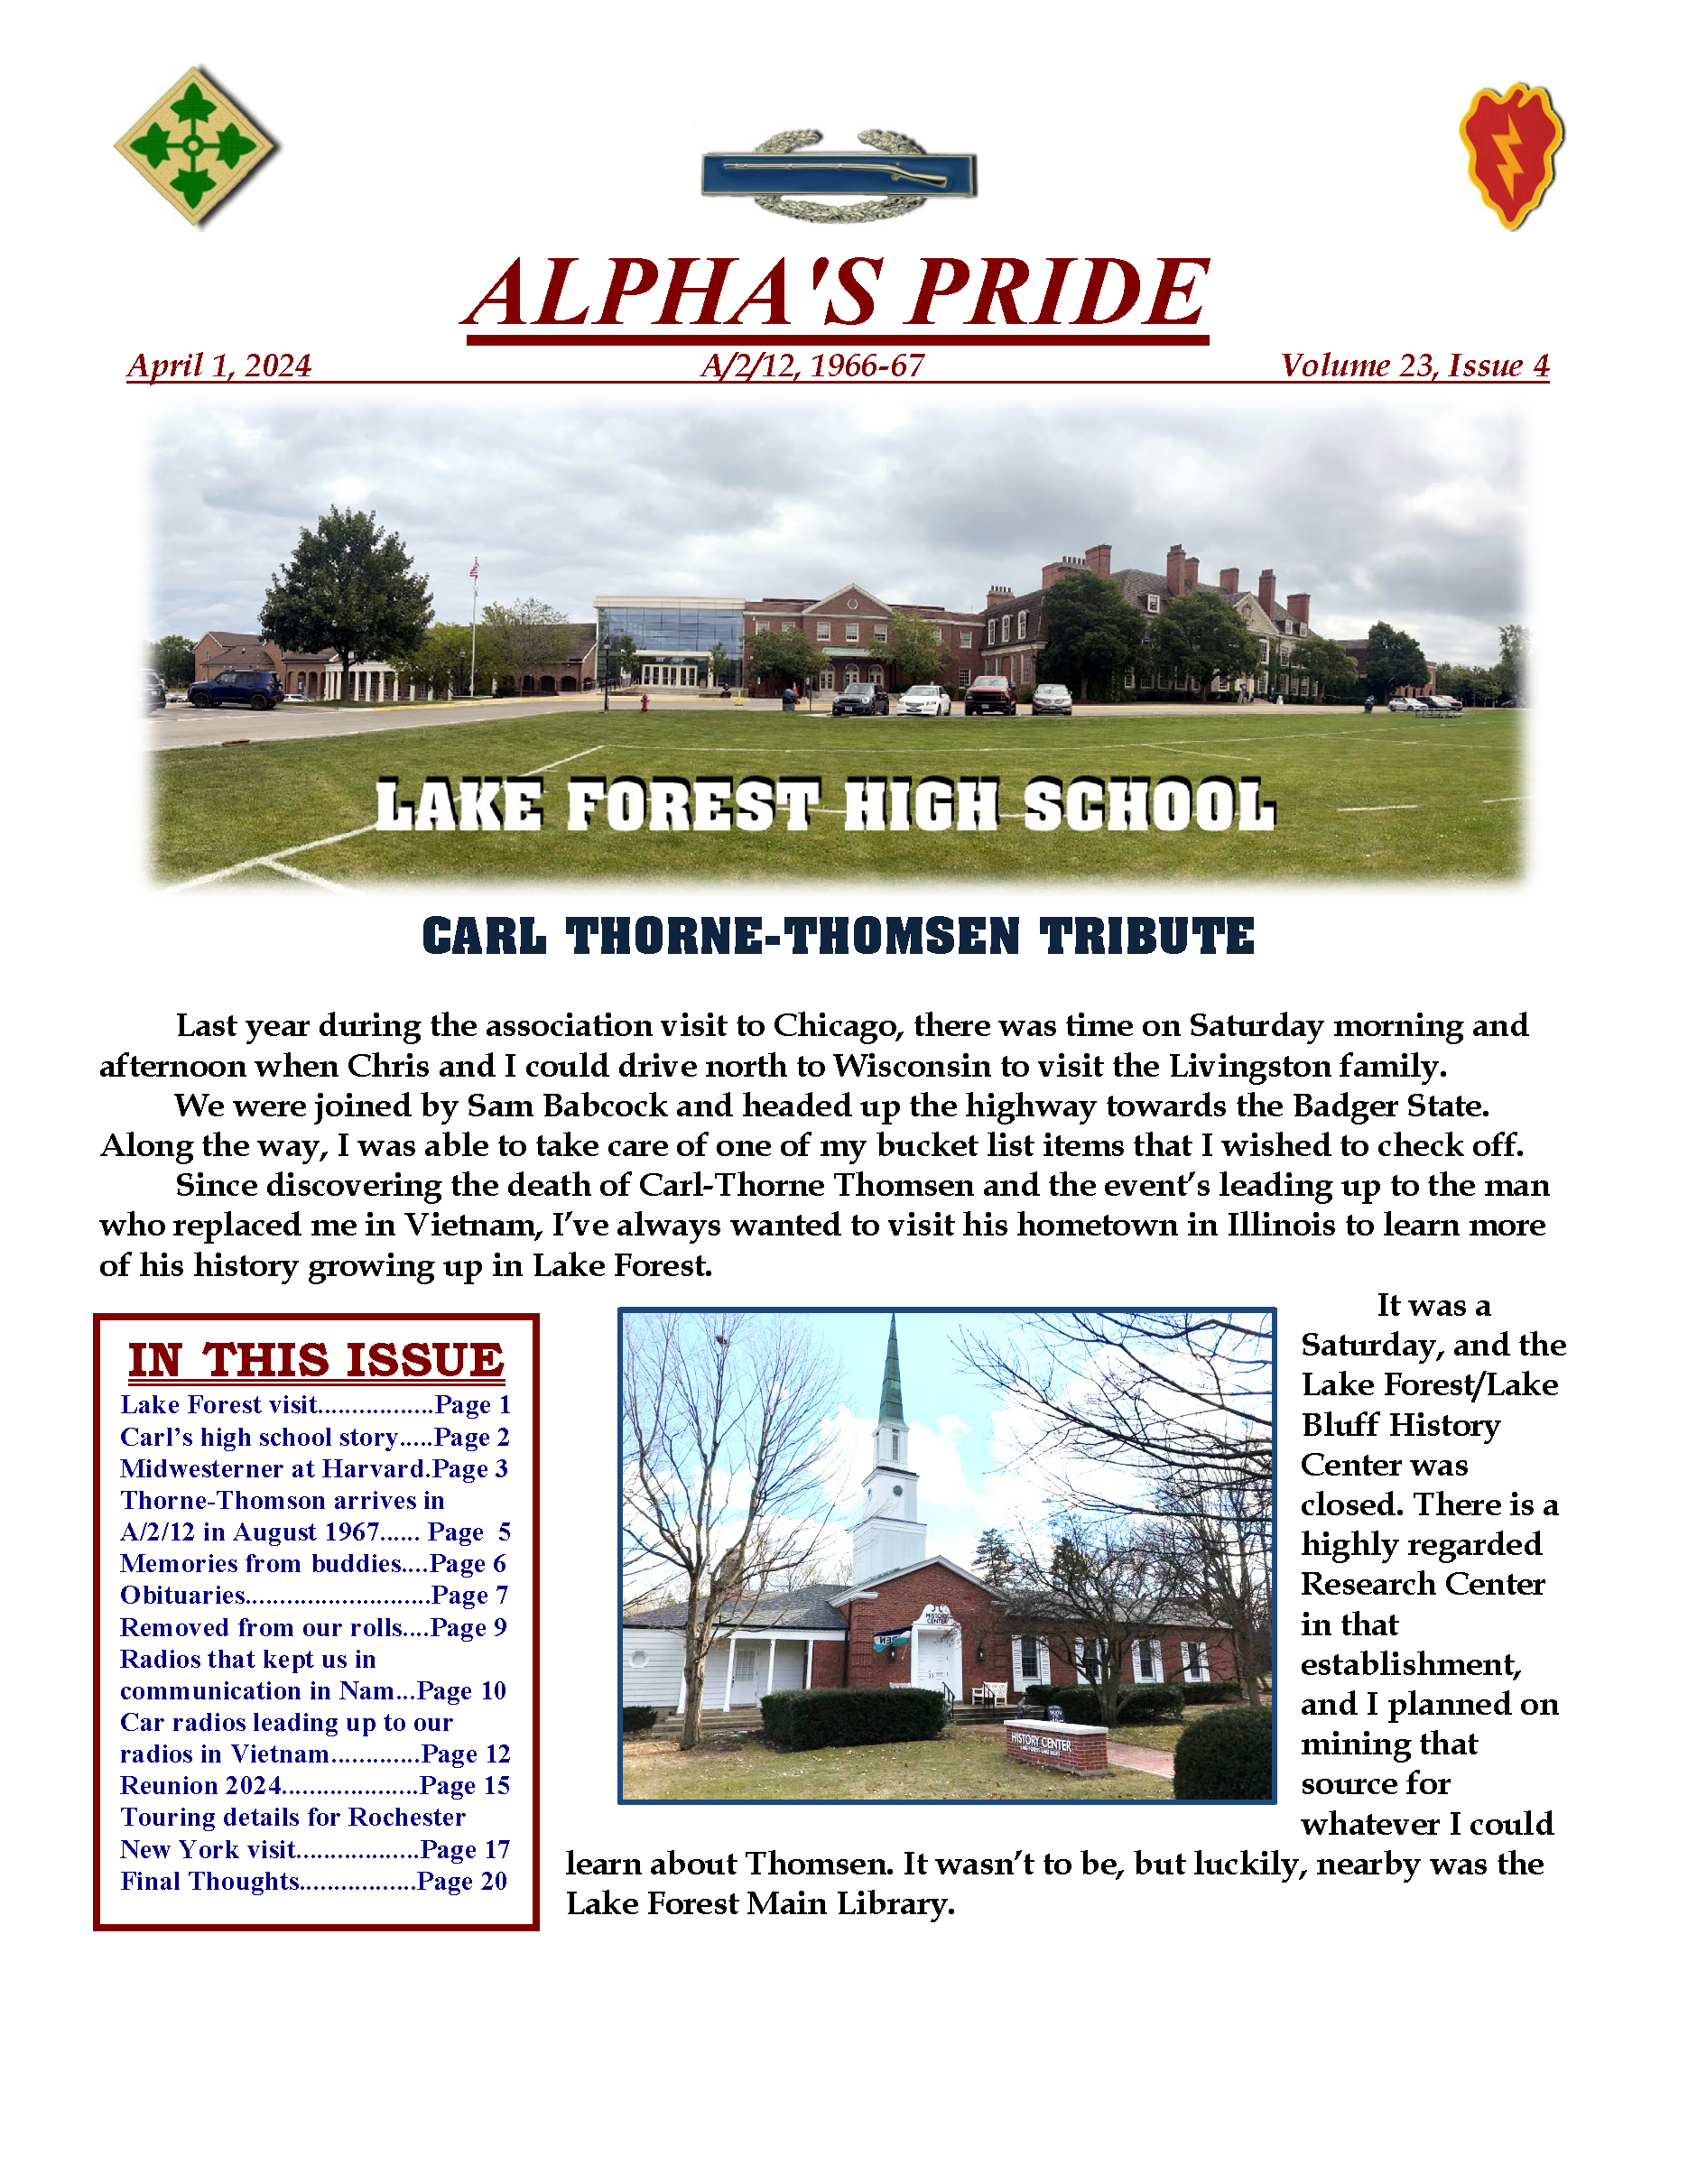 Front page of article by veteran Bill Comeau about researching at Lake Forest Library